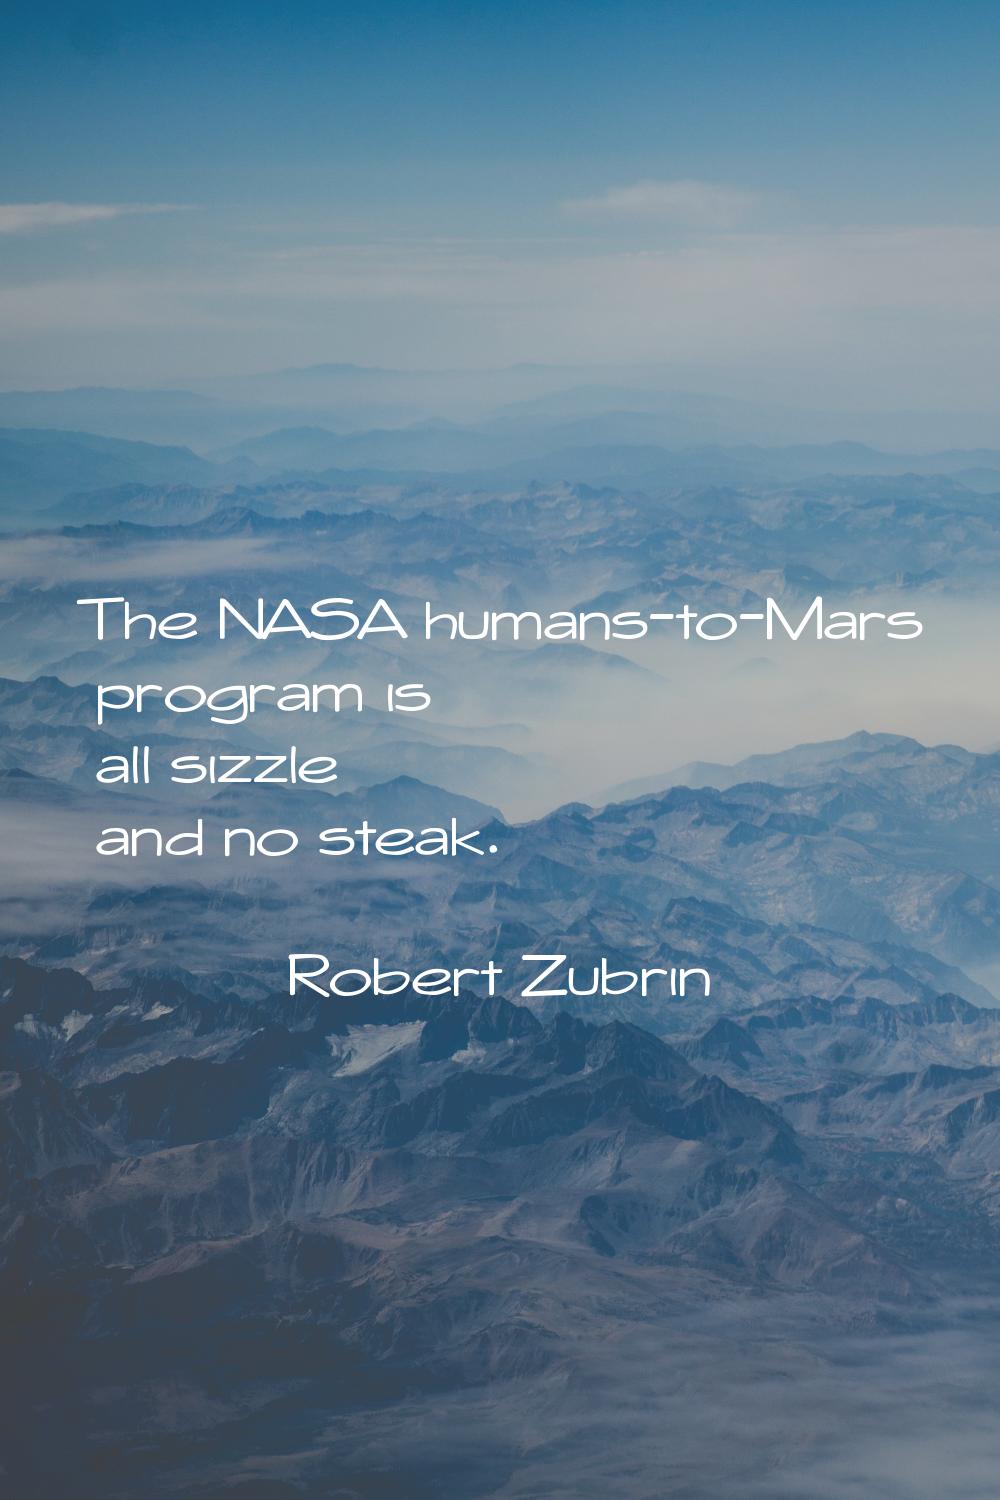 The NASA humans-to-Mars program is all sizzle and no steak.